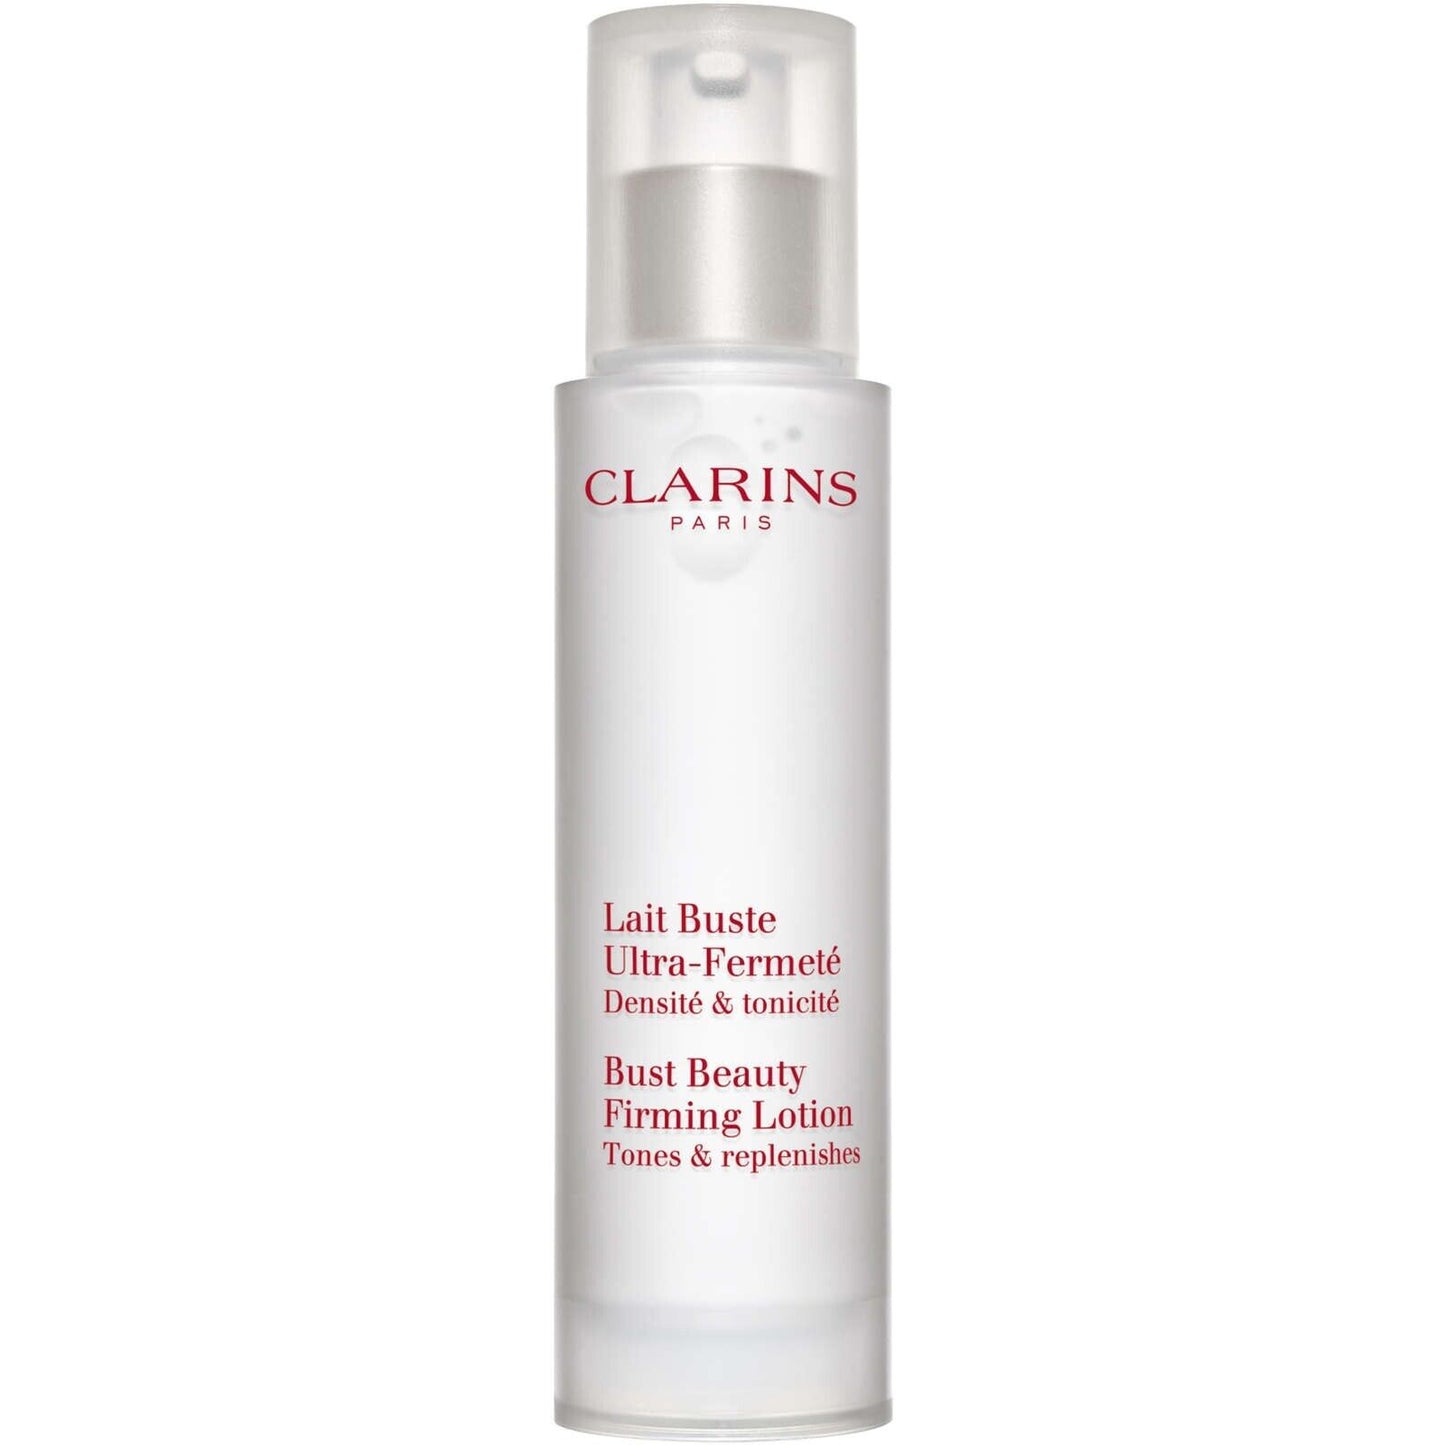 Clarins Bust Beauty Firming Lotion Young Looking Shape Night-Time Treat 50ml NEW